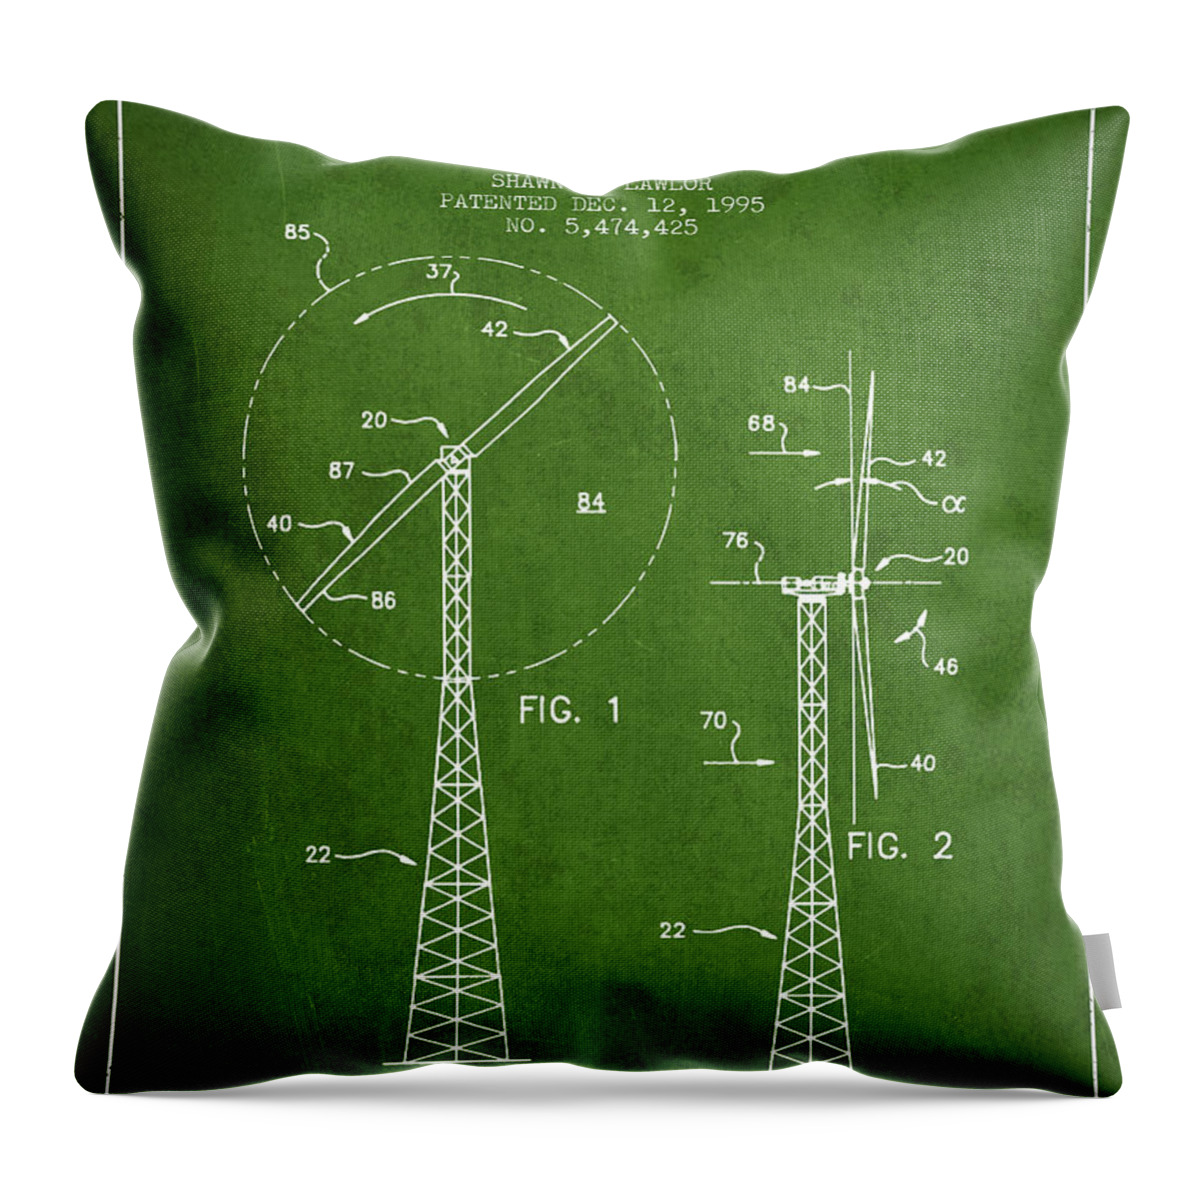 Wind Turbine Throw Pillow featuring the digital art Wind Turbine Rotor Blade Patent from 1995 - Green by Aged Pixel